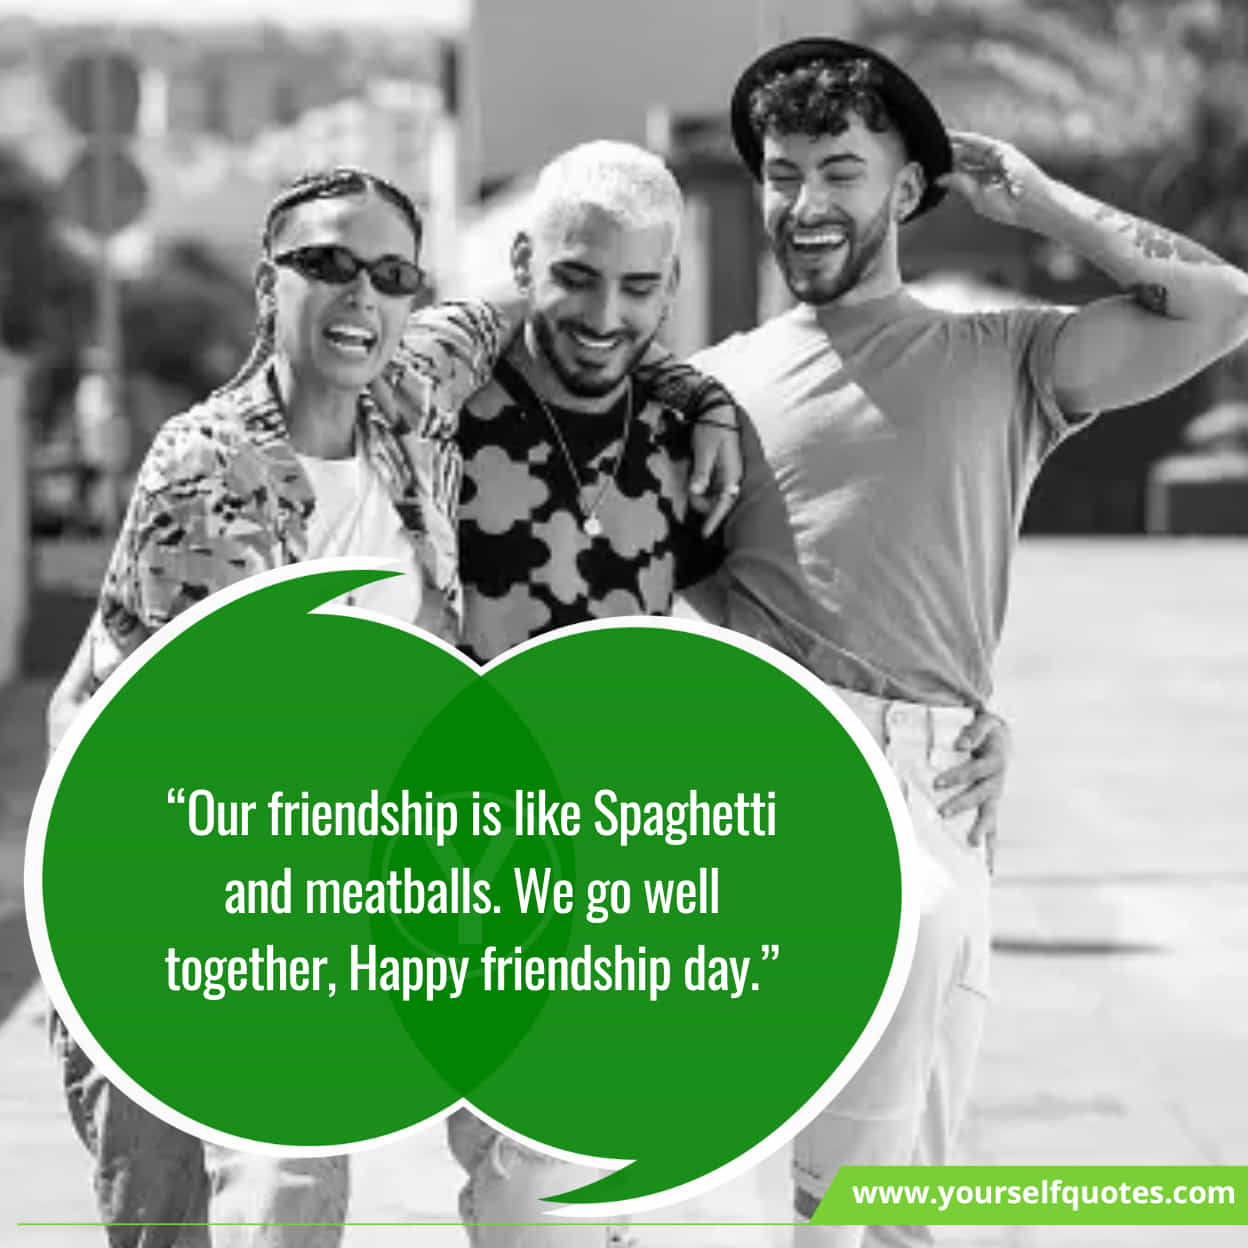 Quotes to celebrate true friendship on Friendship Day